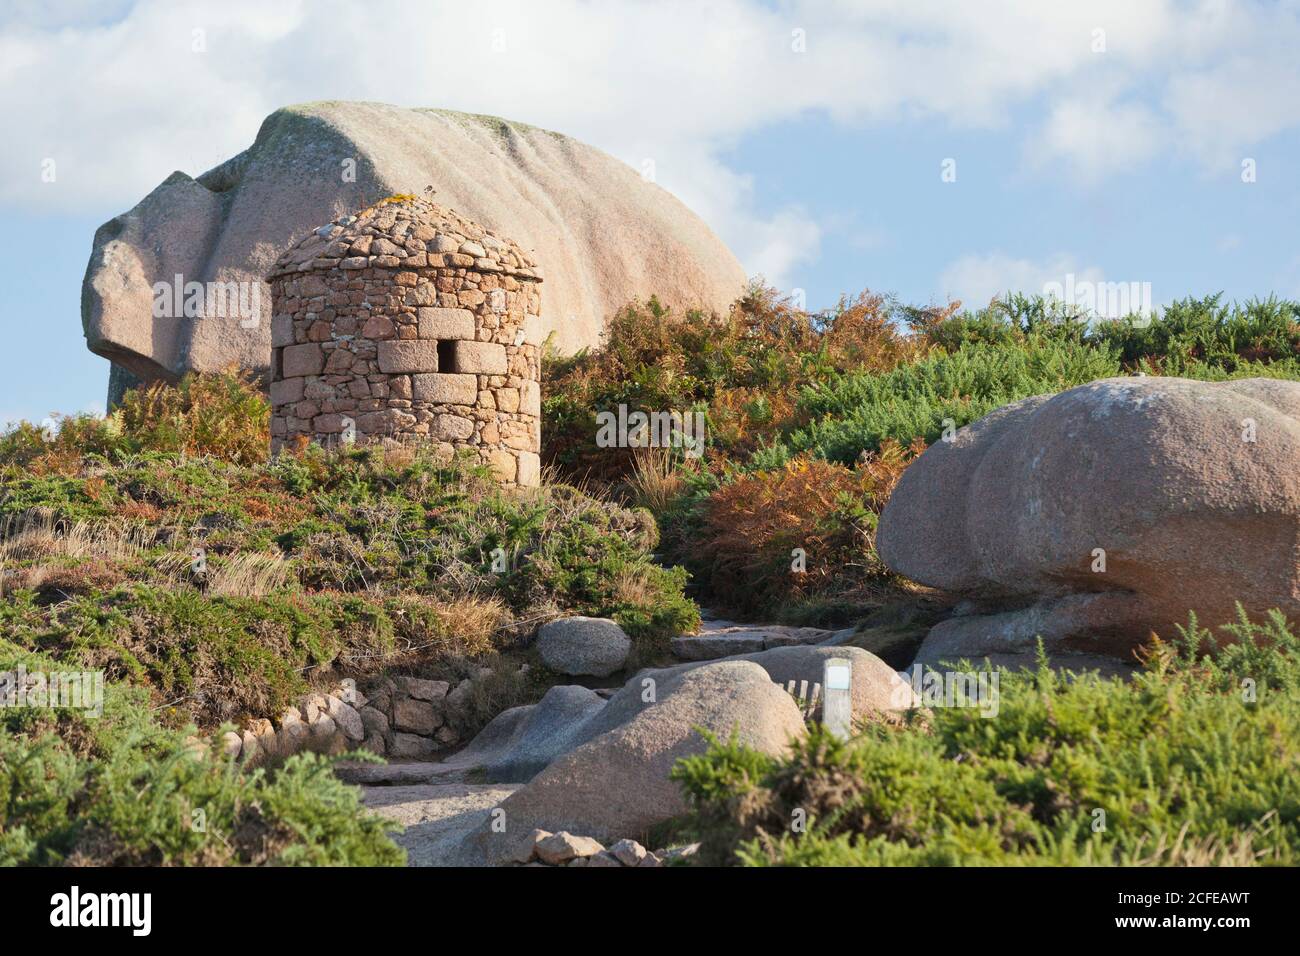 Old watchtower at the Cote de Granit Rose in Brittany Stock Photo